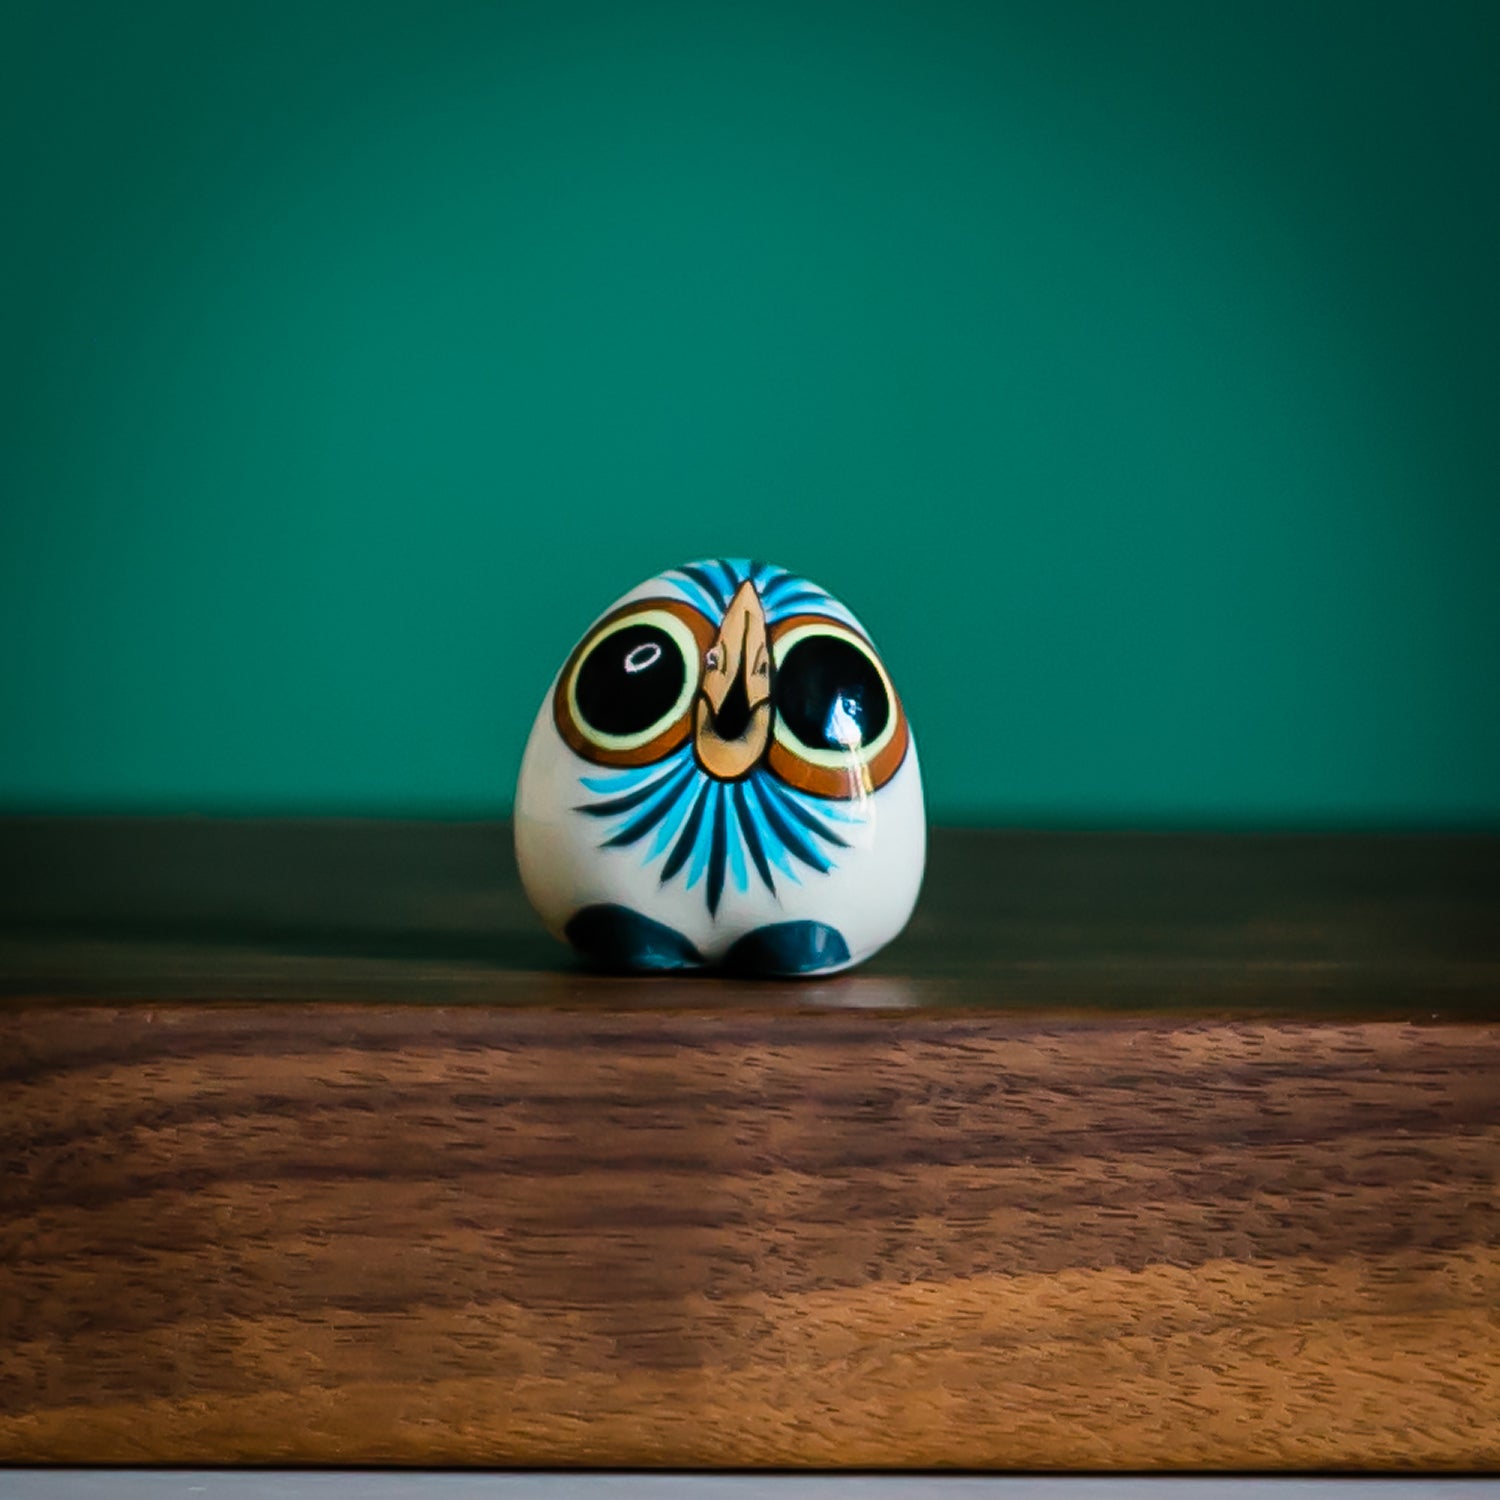 handpainted ceramic owl figurine with big eyes and blue feathers resting on wood block